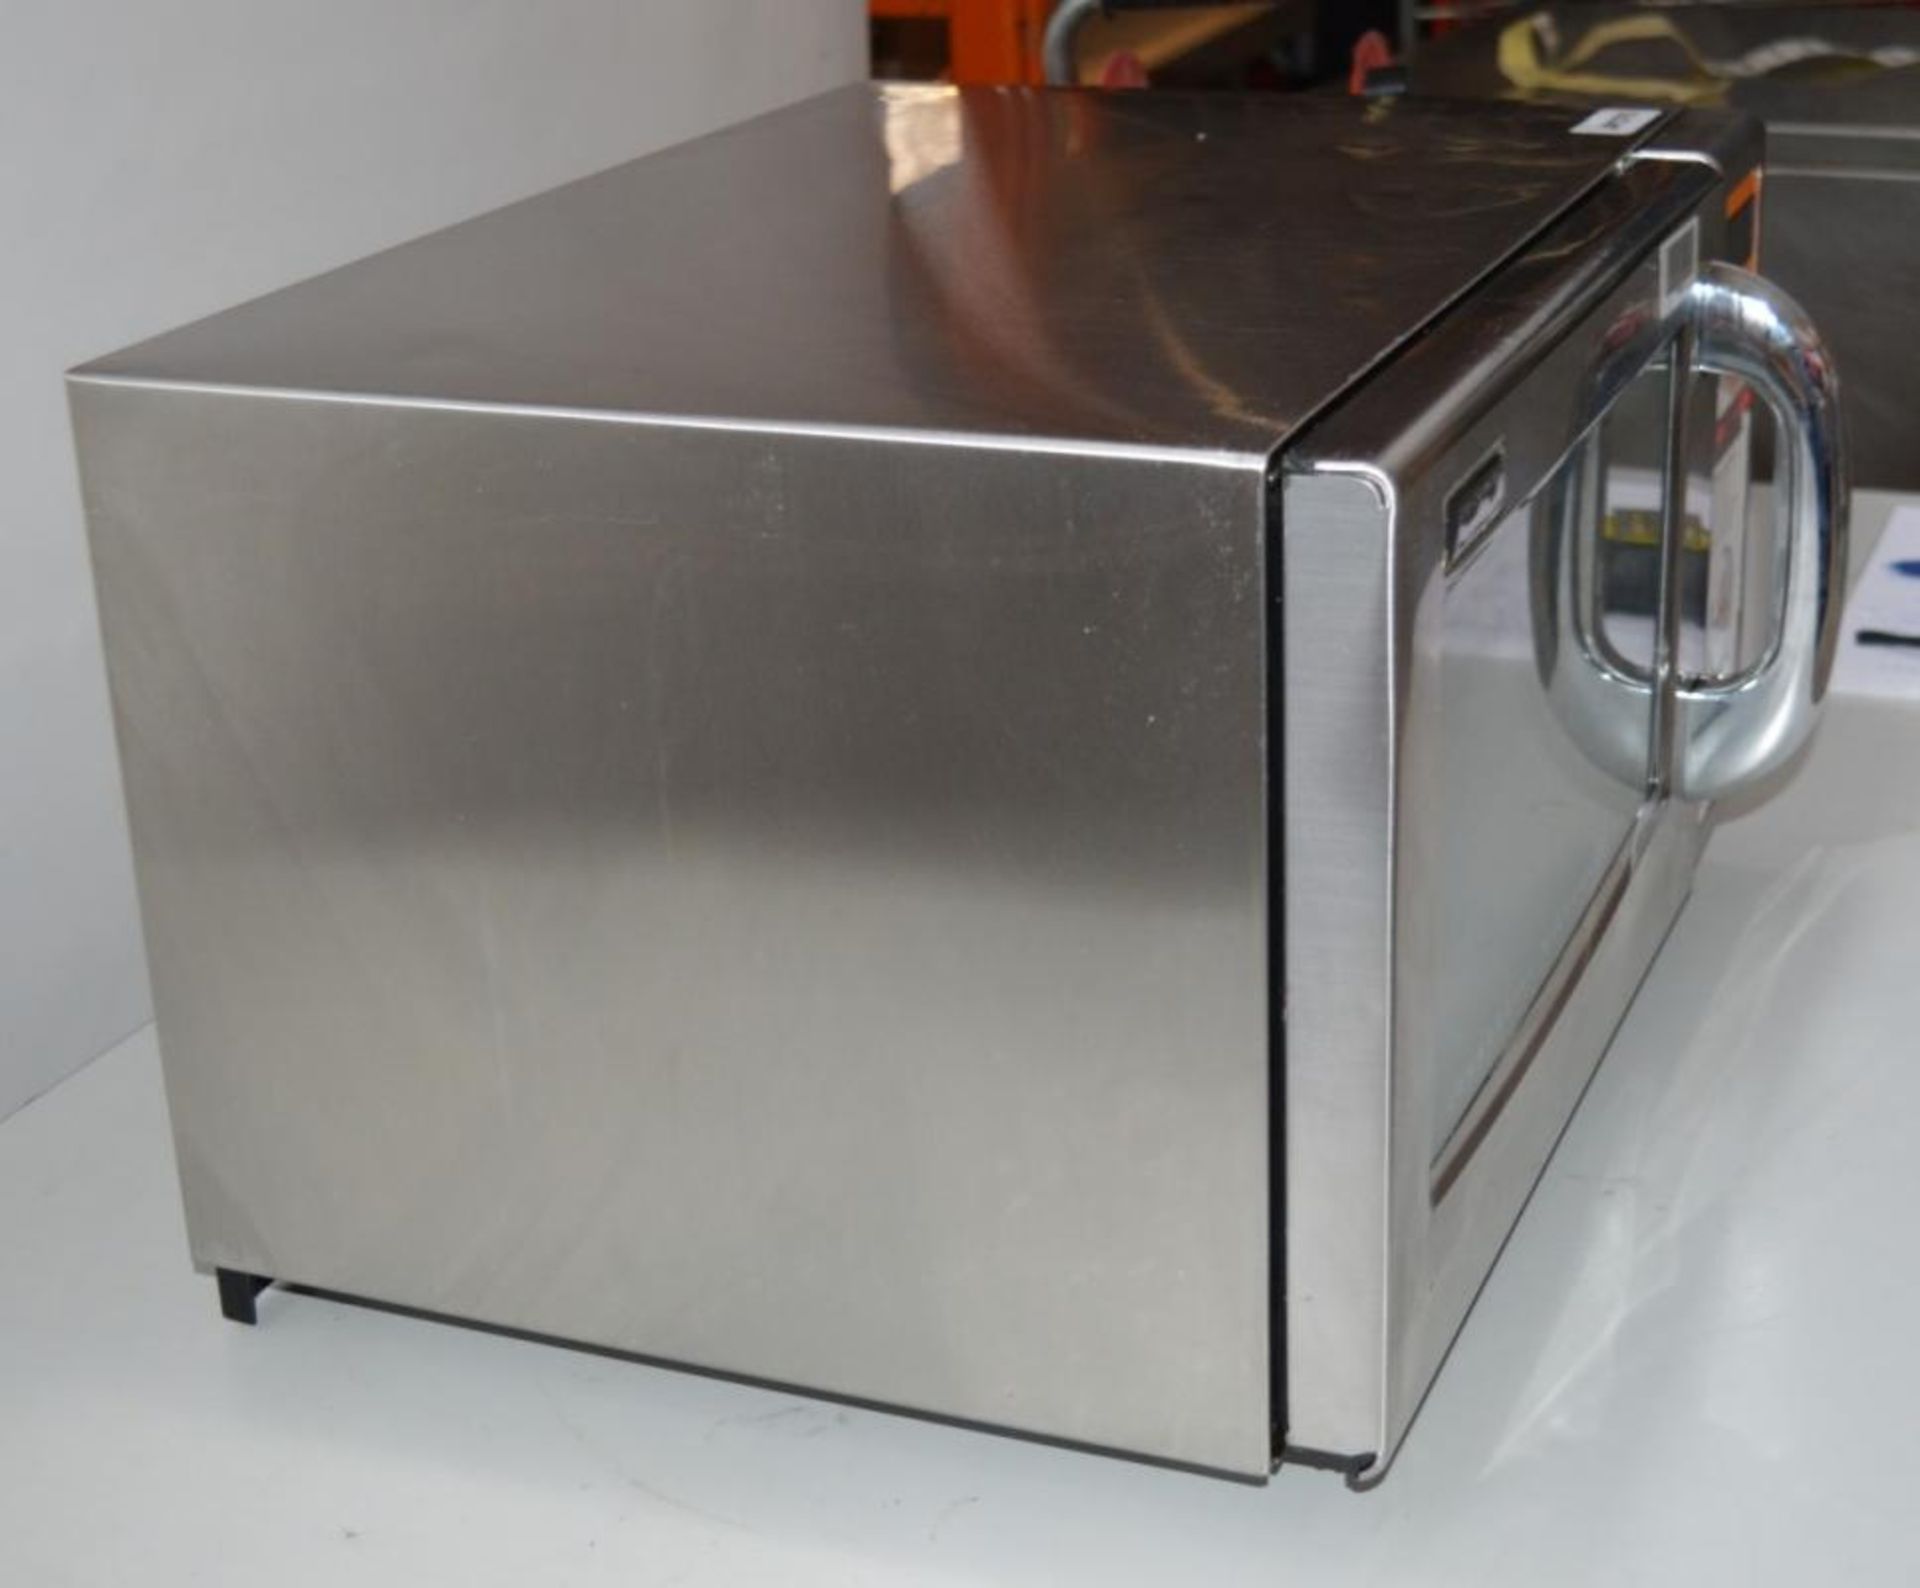 1 x iWave MiWAVE1000 Automated Foodservice Solution - Stainless Steel 1000w Catering Microwave - Image 11 of 14